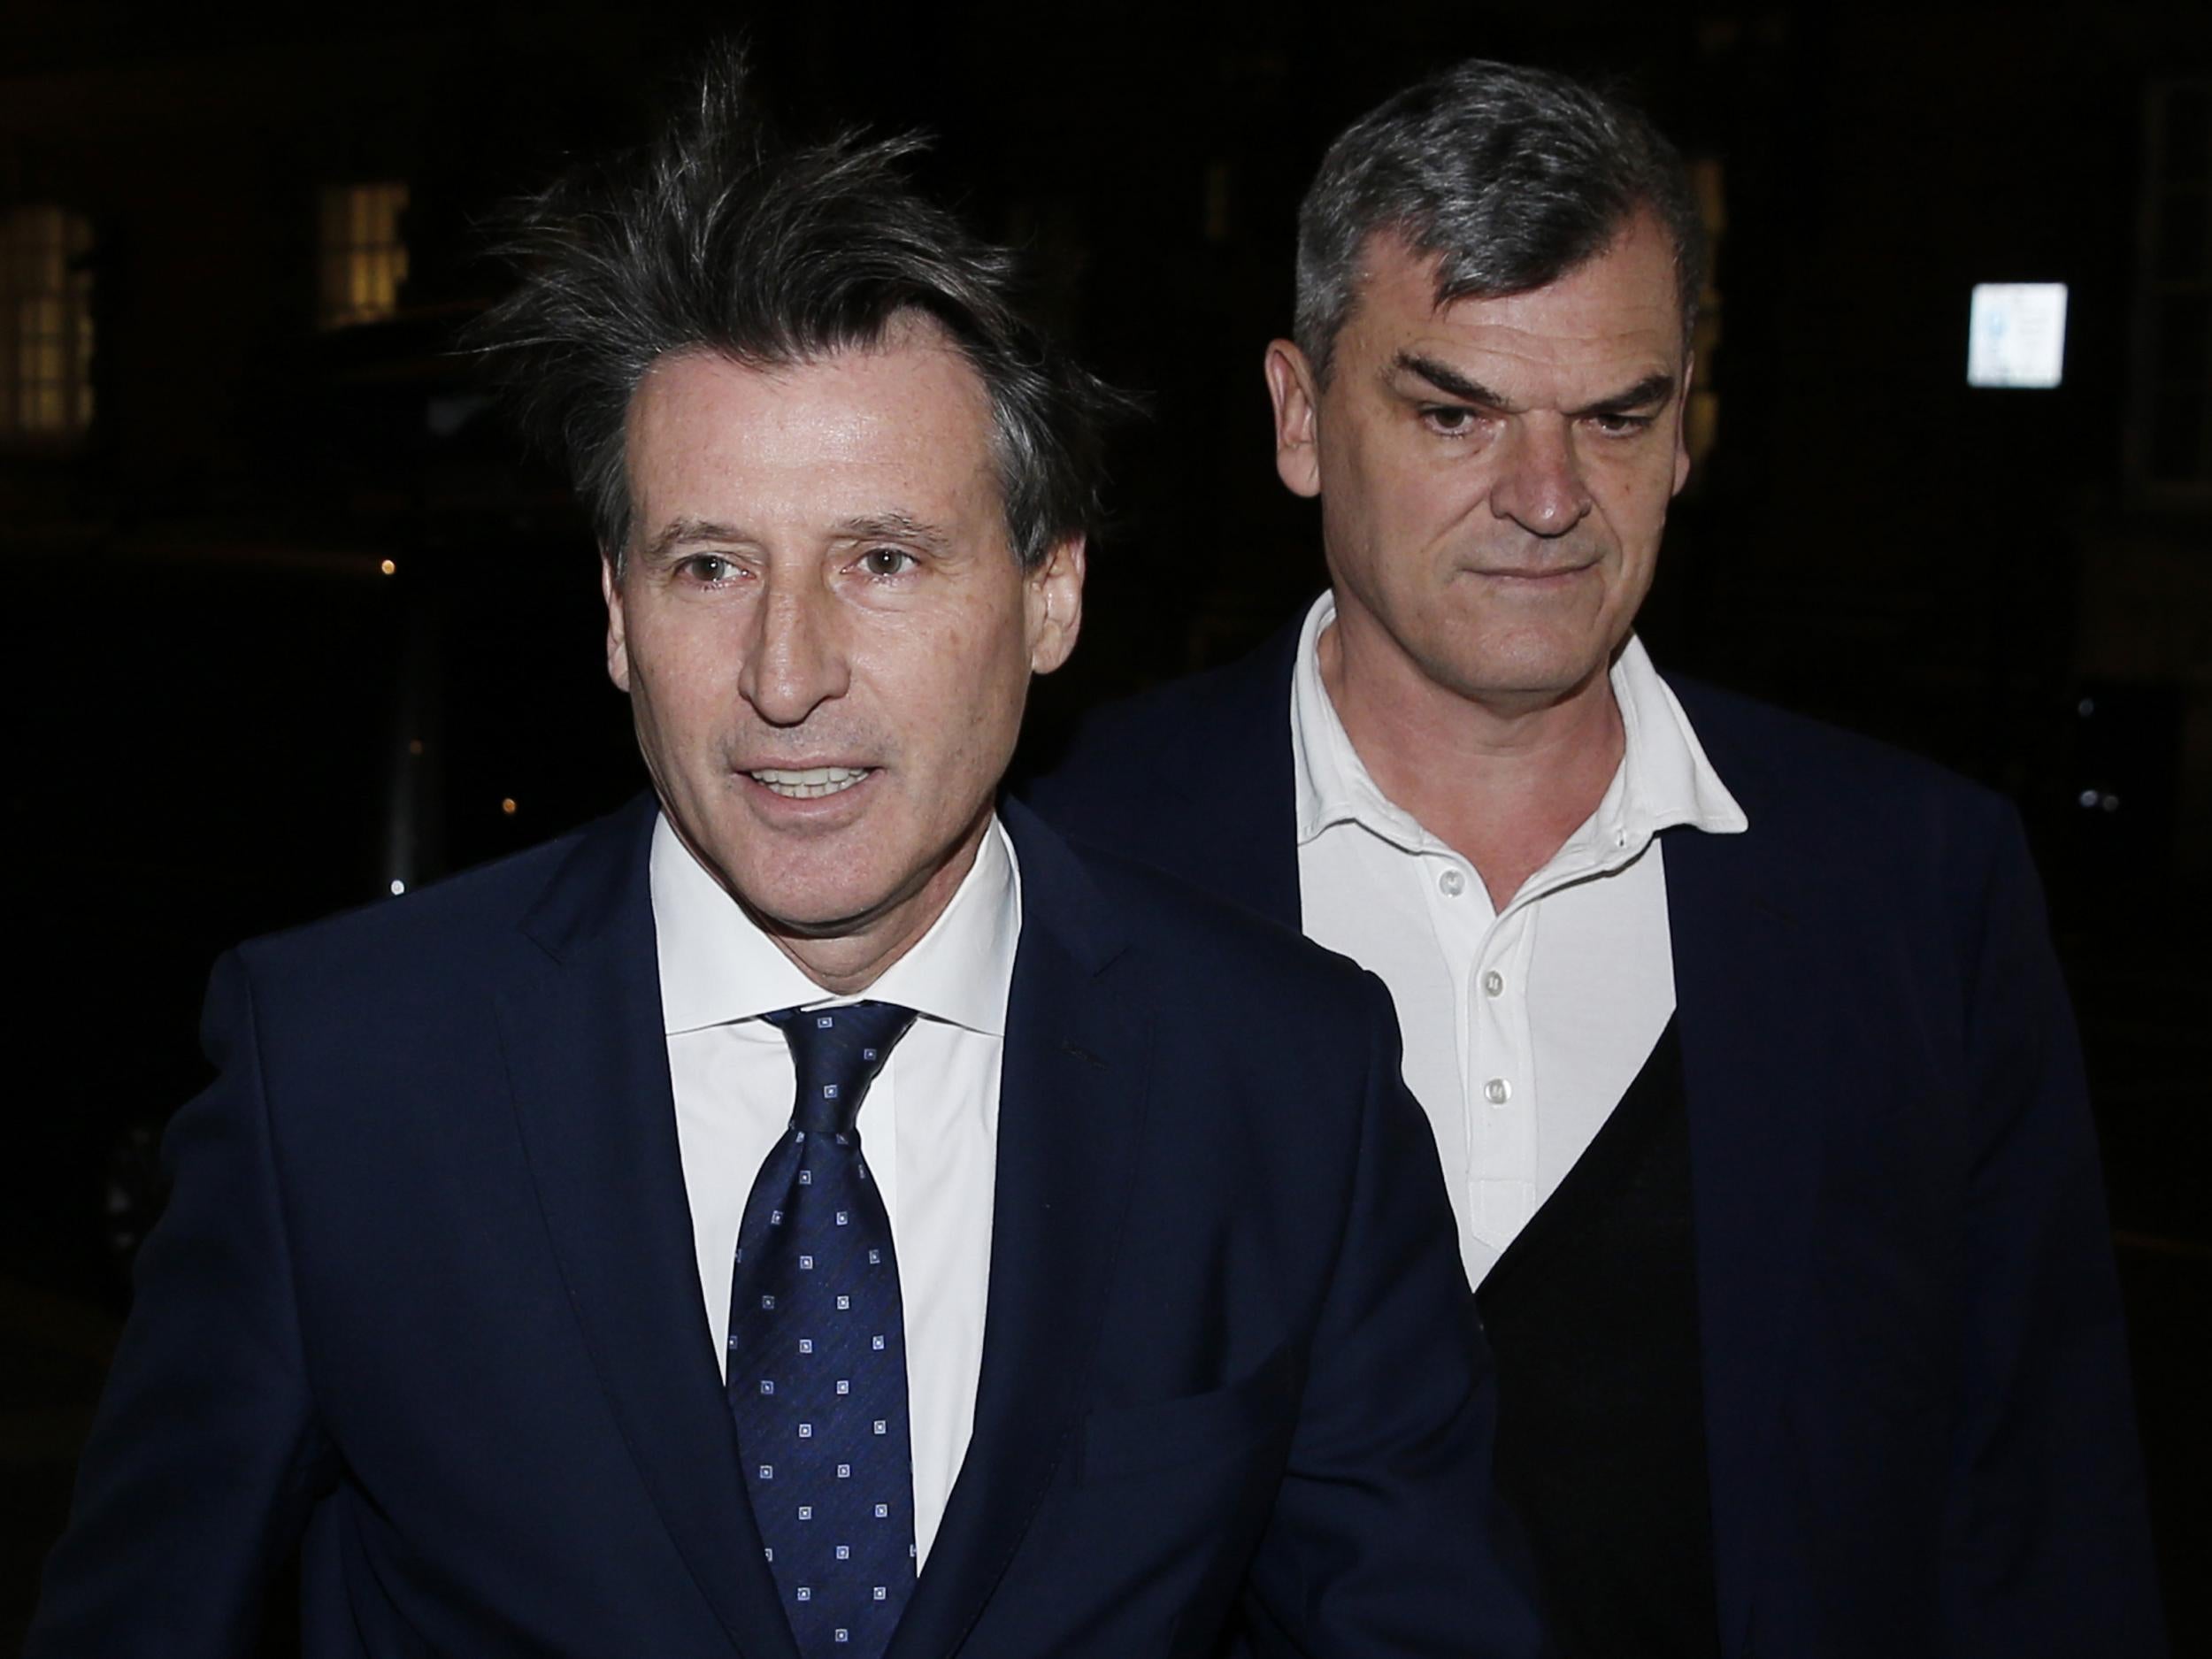 Coe said Davies was 'absolutely' his friend